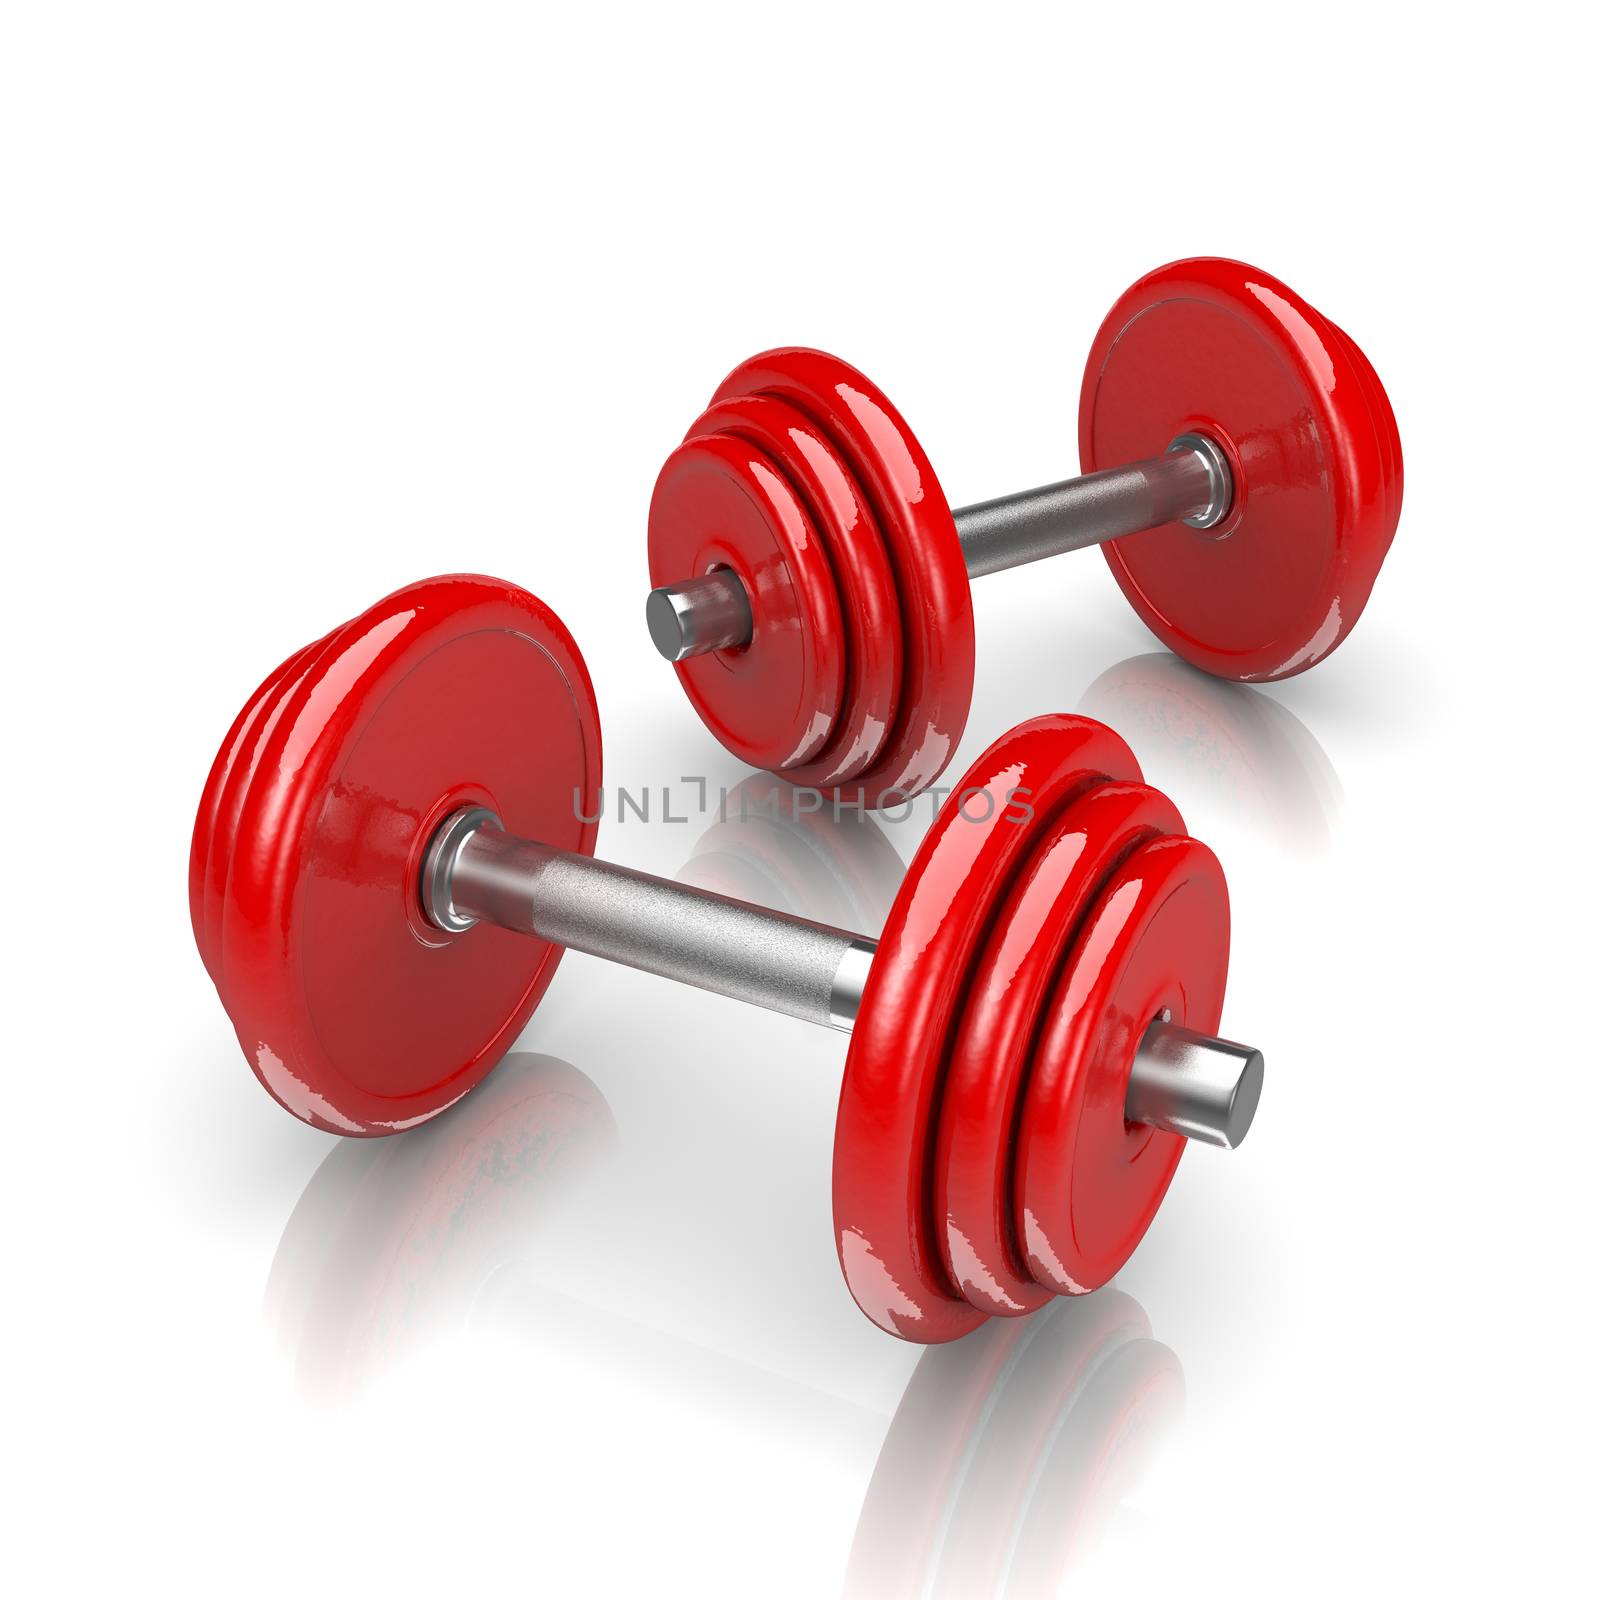 Couple of Red Weights on White Background 3D Illustration